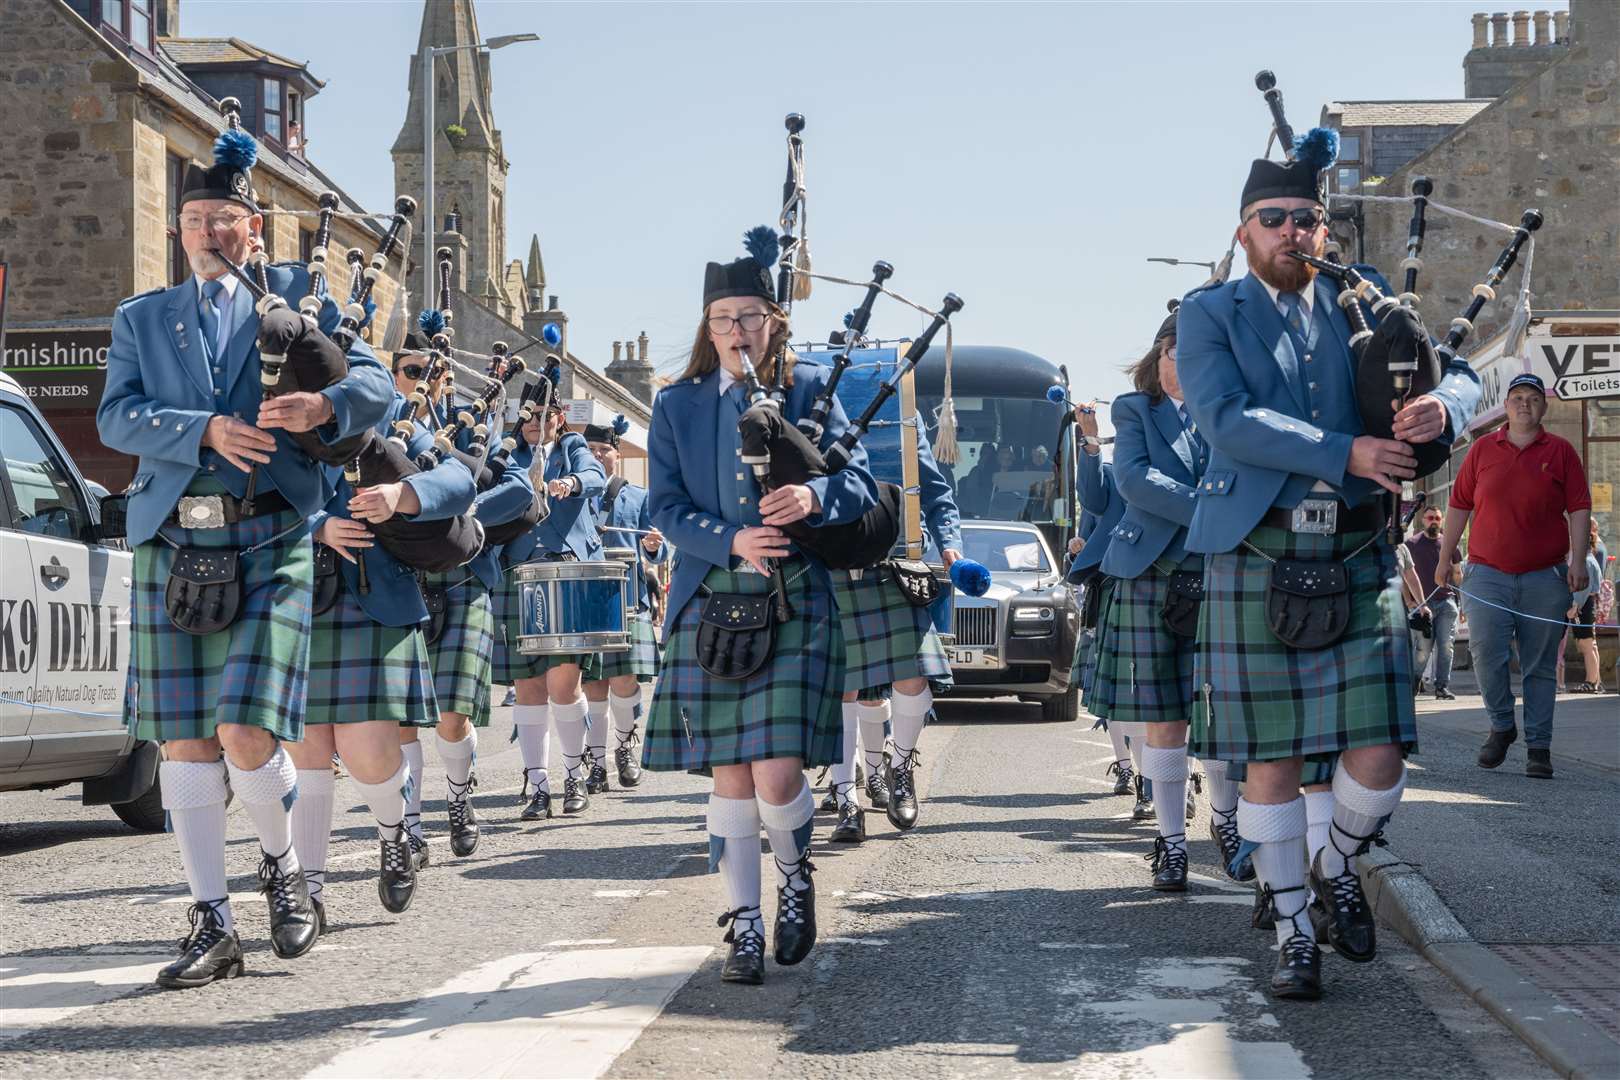 Buckie and District Pipe Band members will be part of the parade.